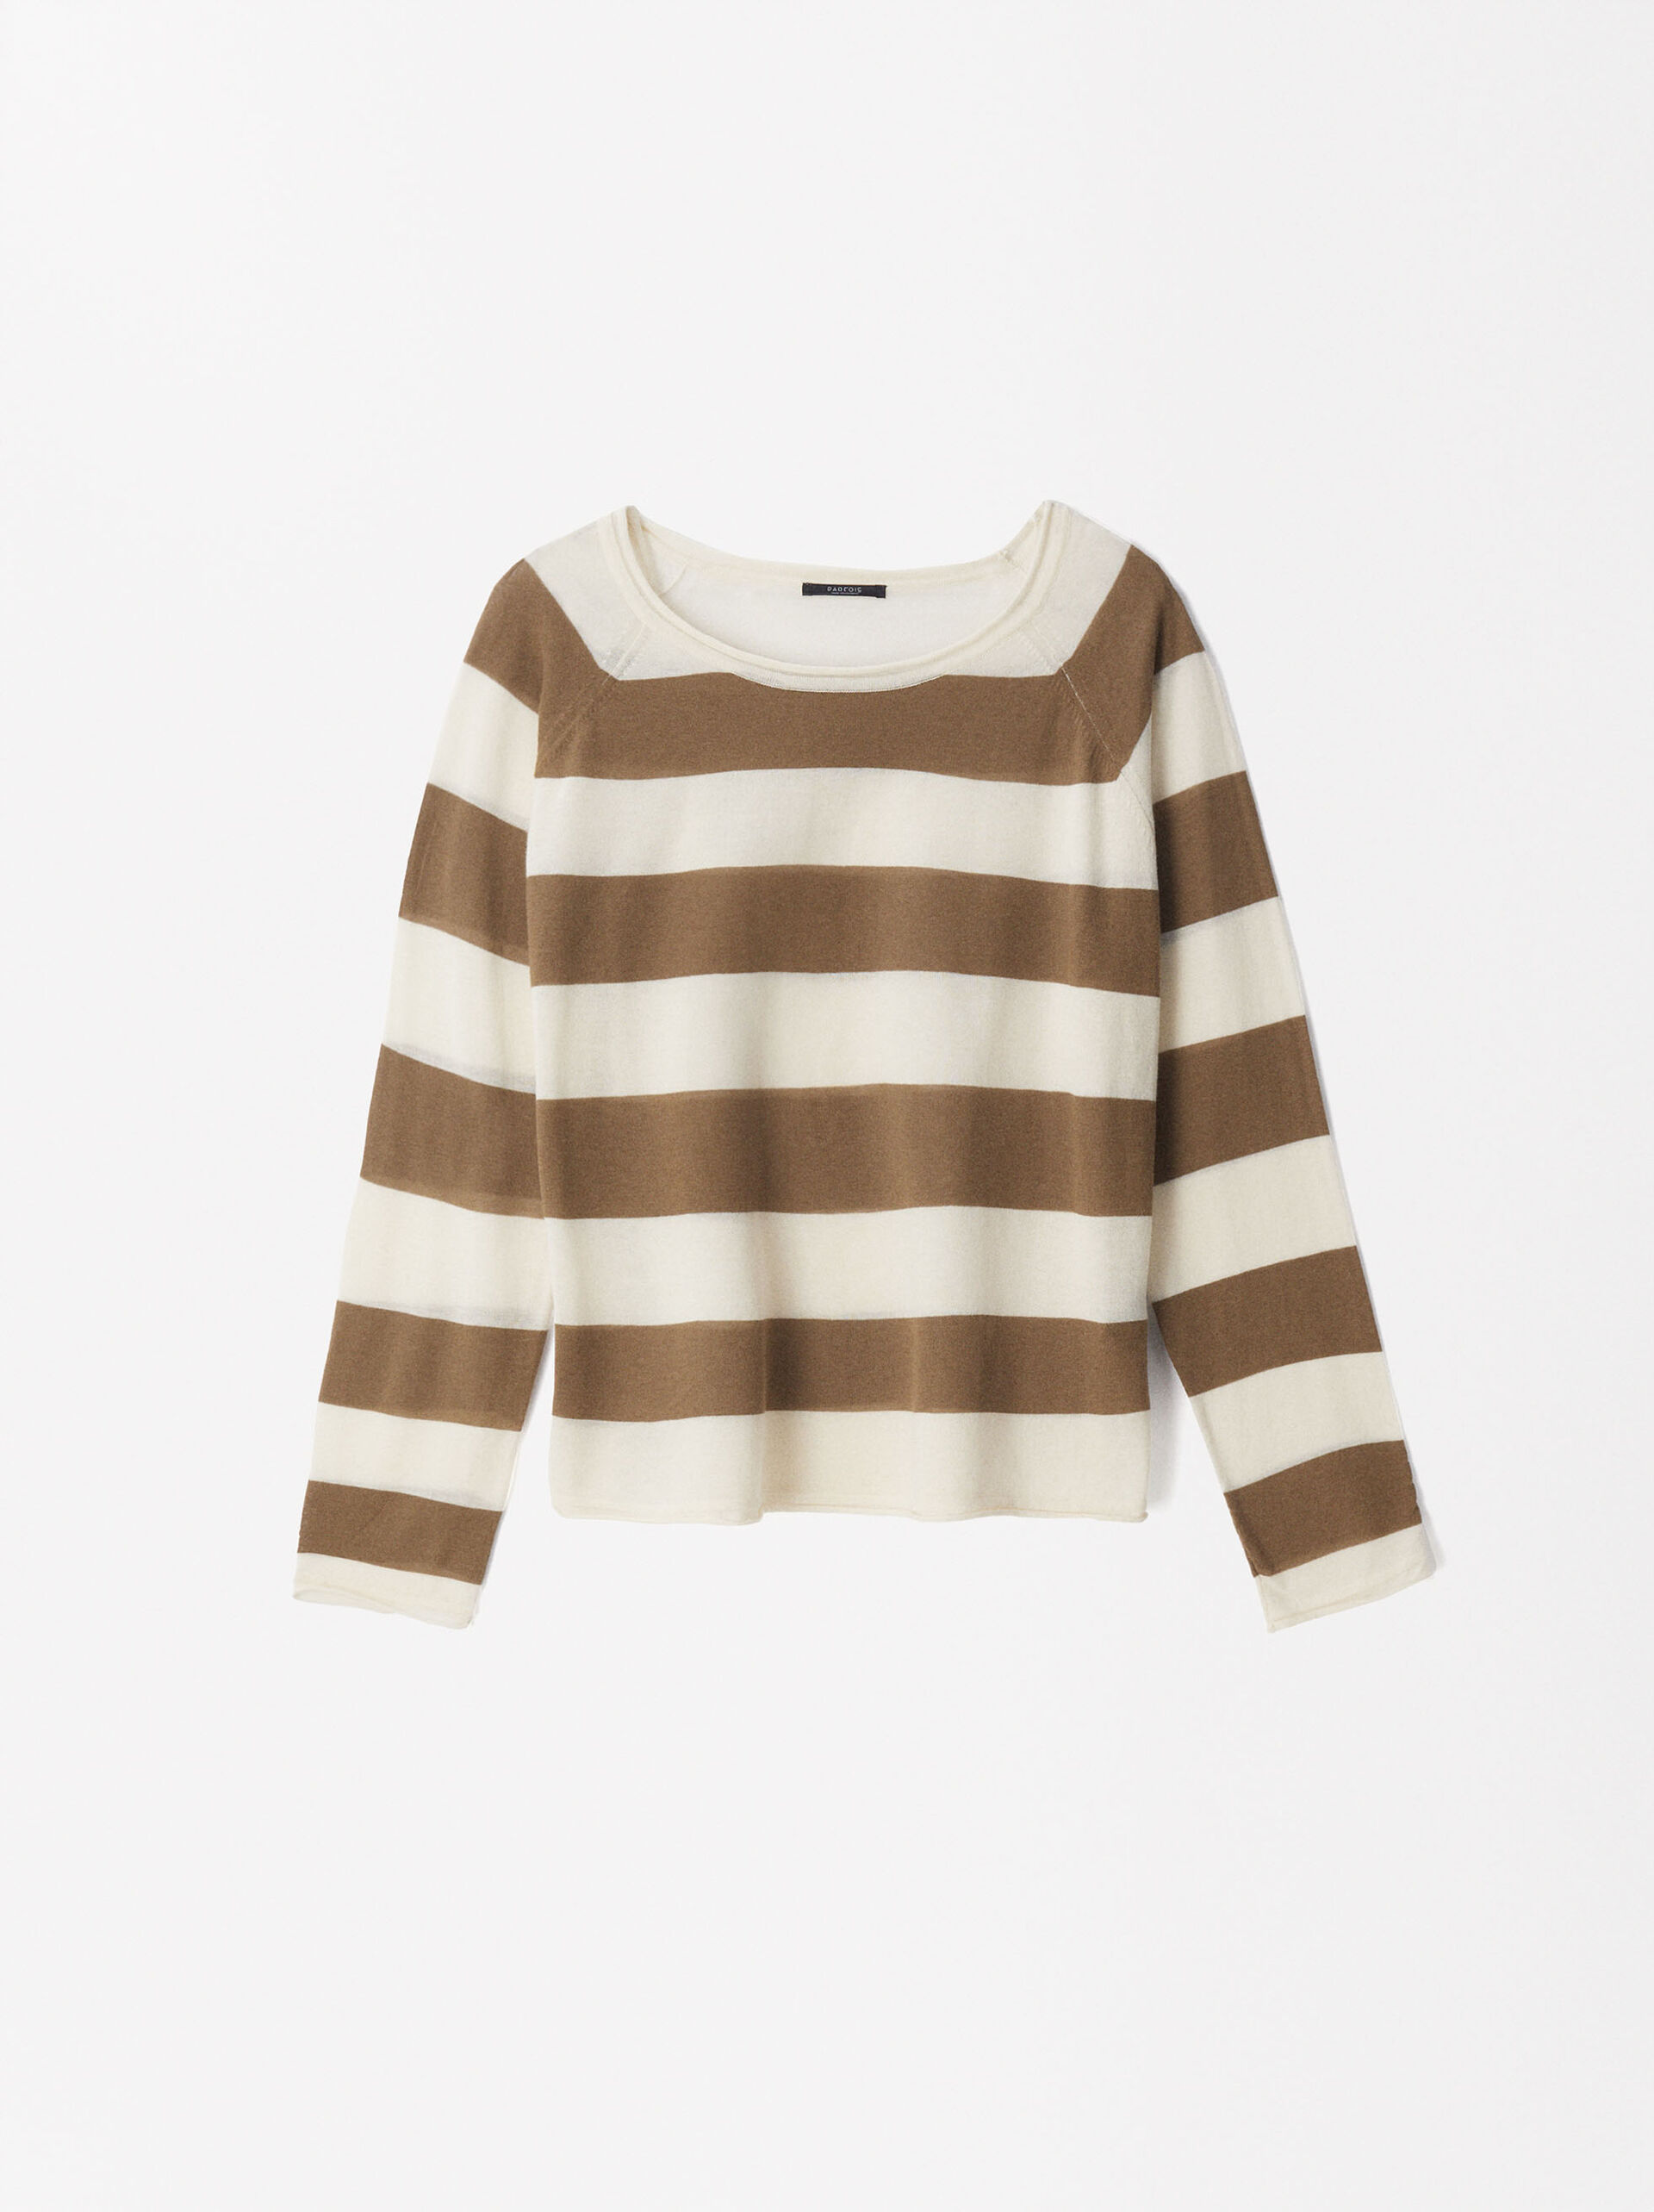 Striped Knit Sweater image number 1.0